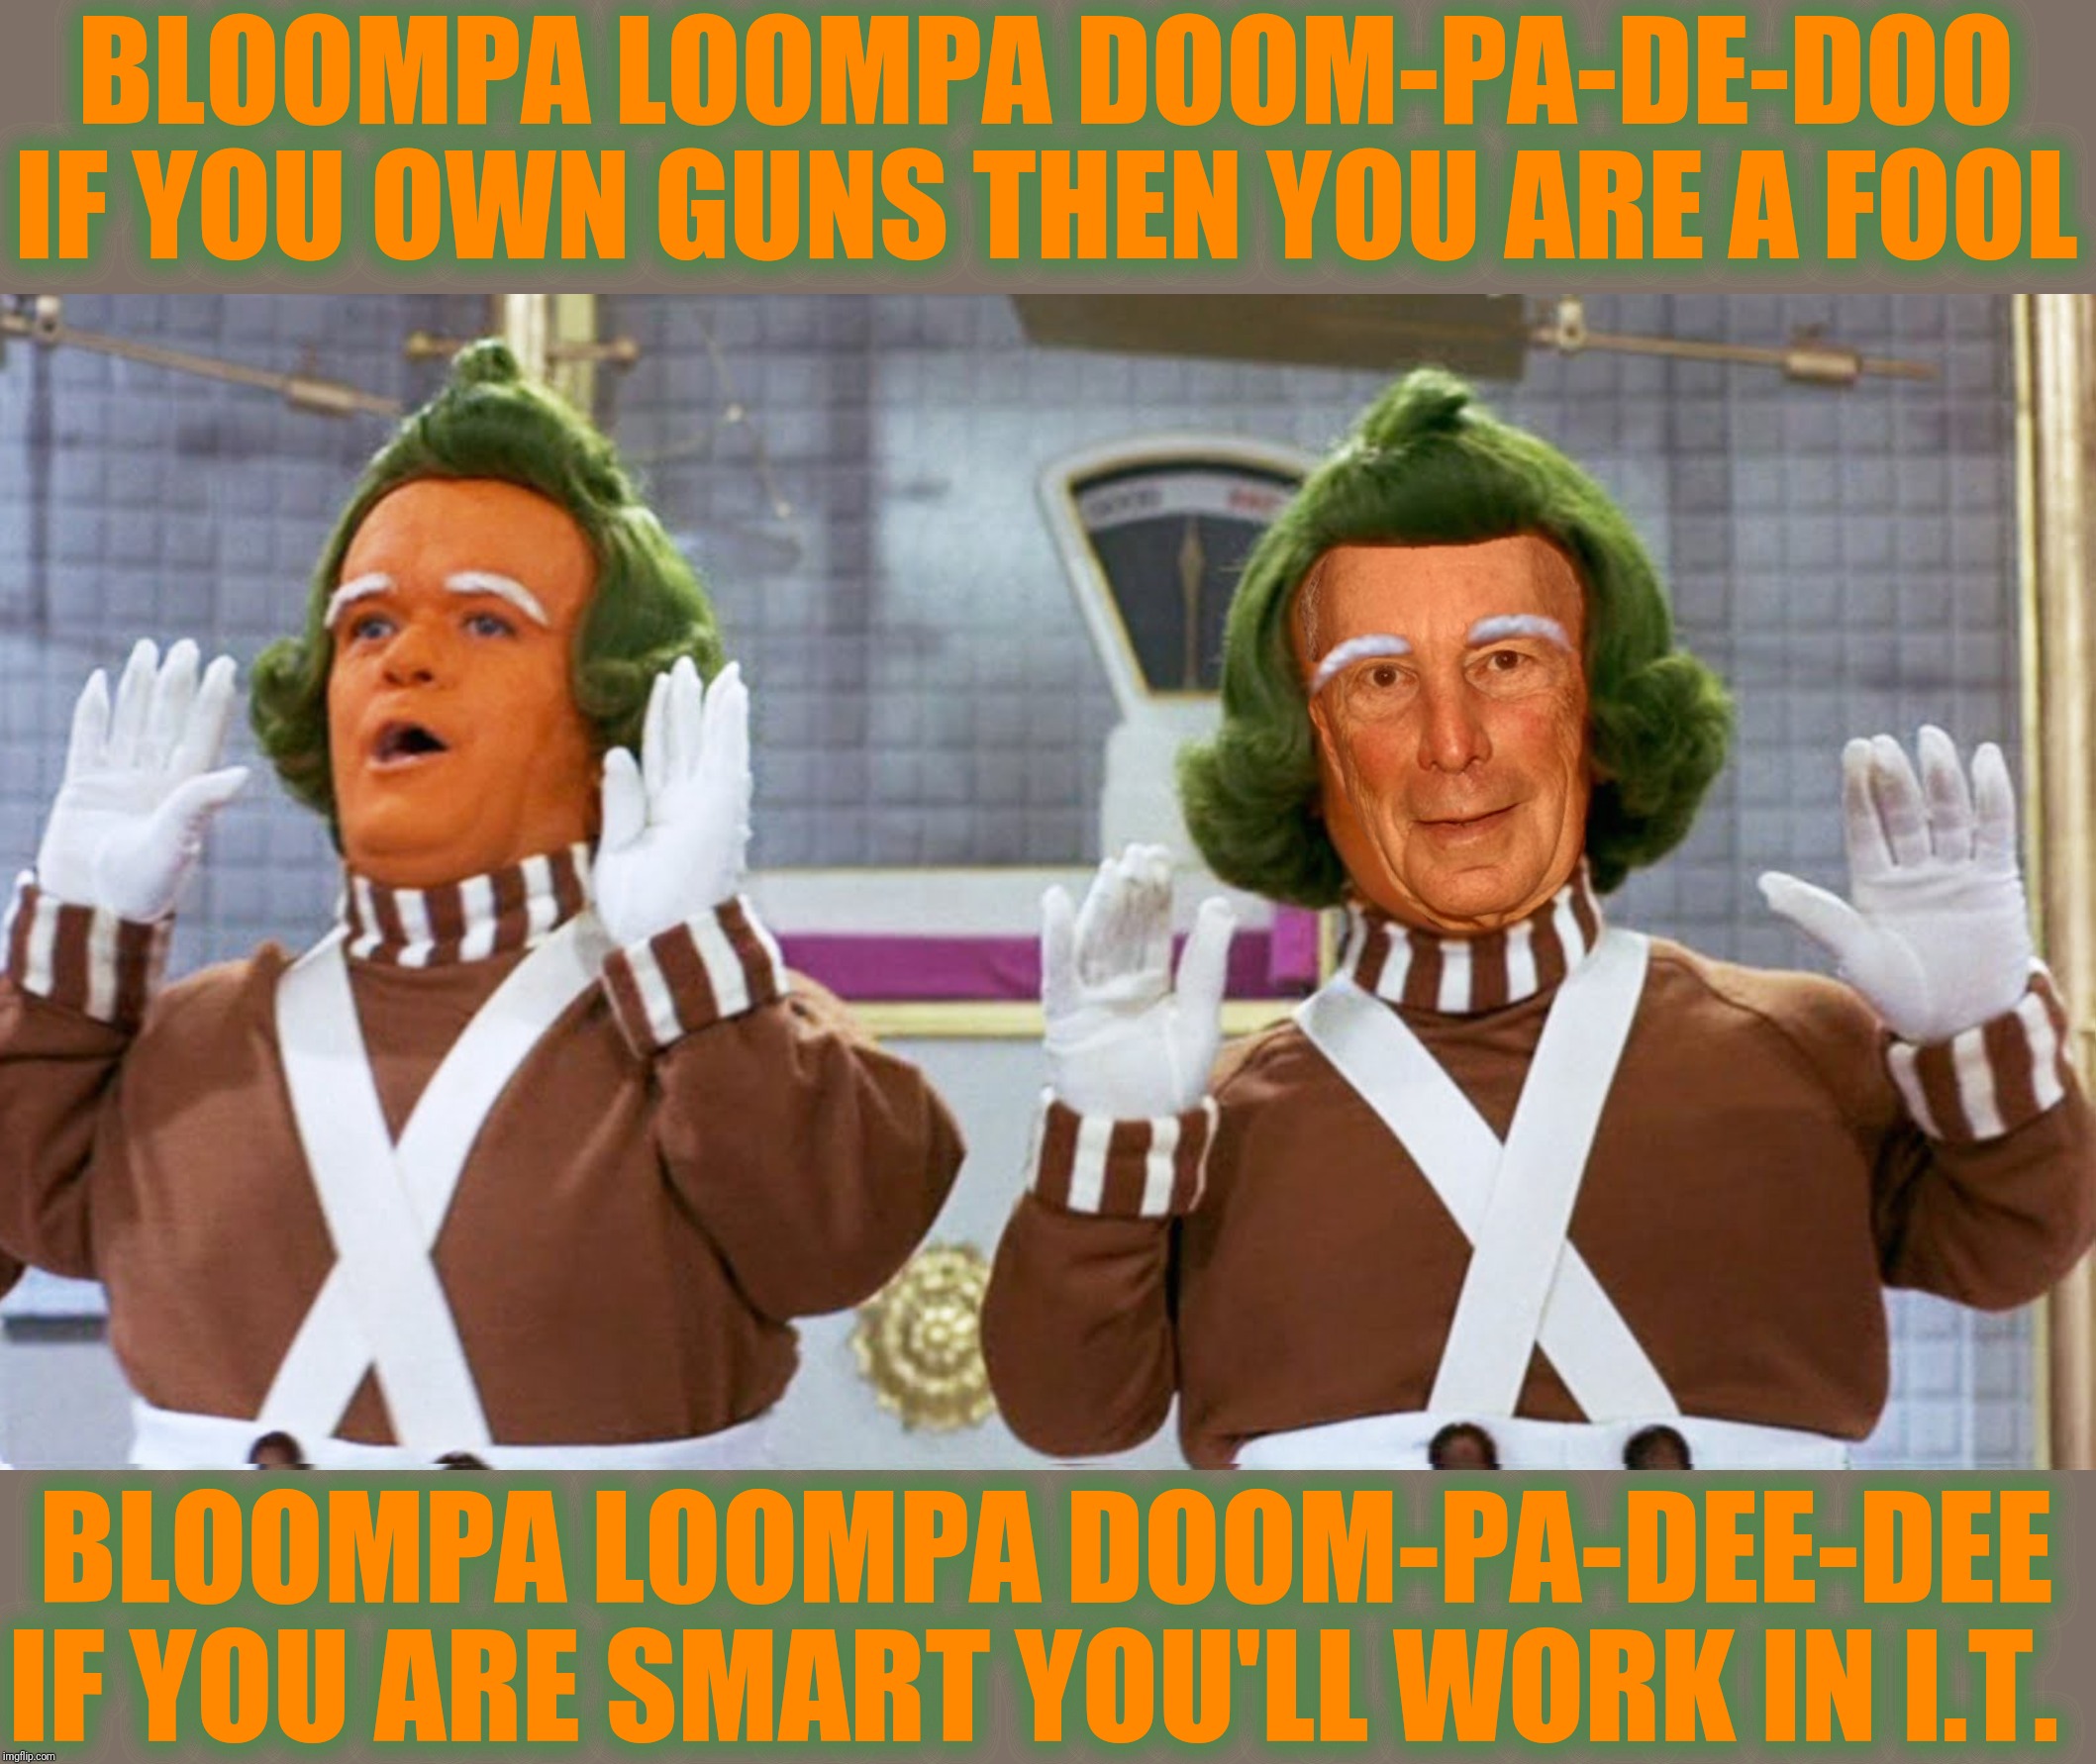 Bad Photoshop Sunday presents:  The Bloompa Loompa Song | BLOOMPA LOOMPA DOOM-PA-DE-DOO IF YOU OWN GUNS THEN YOU ARE A FOOL; BLOOMPA LOOMPA DOOM-PA-DEE-DEE IF YOU ARE SMART YOU'LL WORK IN I.T. | image tagged in bad photoshop sunday,michael bloomberg,willy wonka,oompa loompa | made w/ Imgflip meme maker